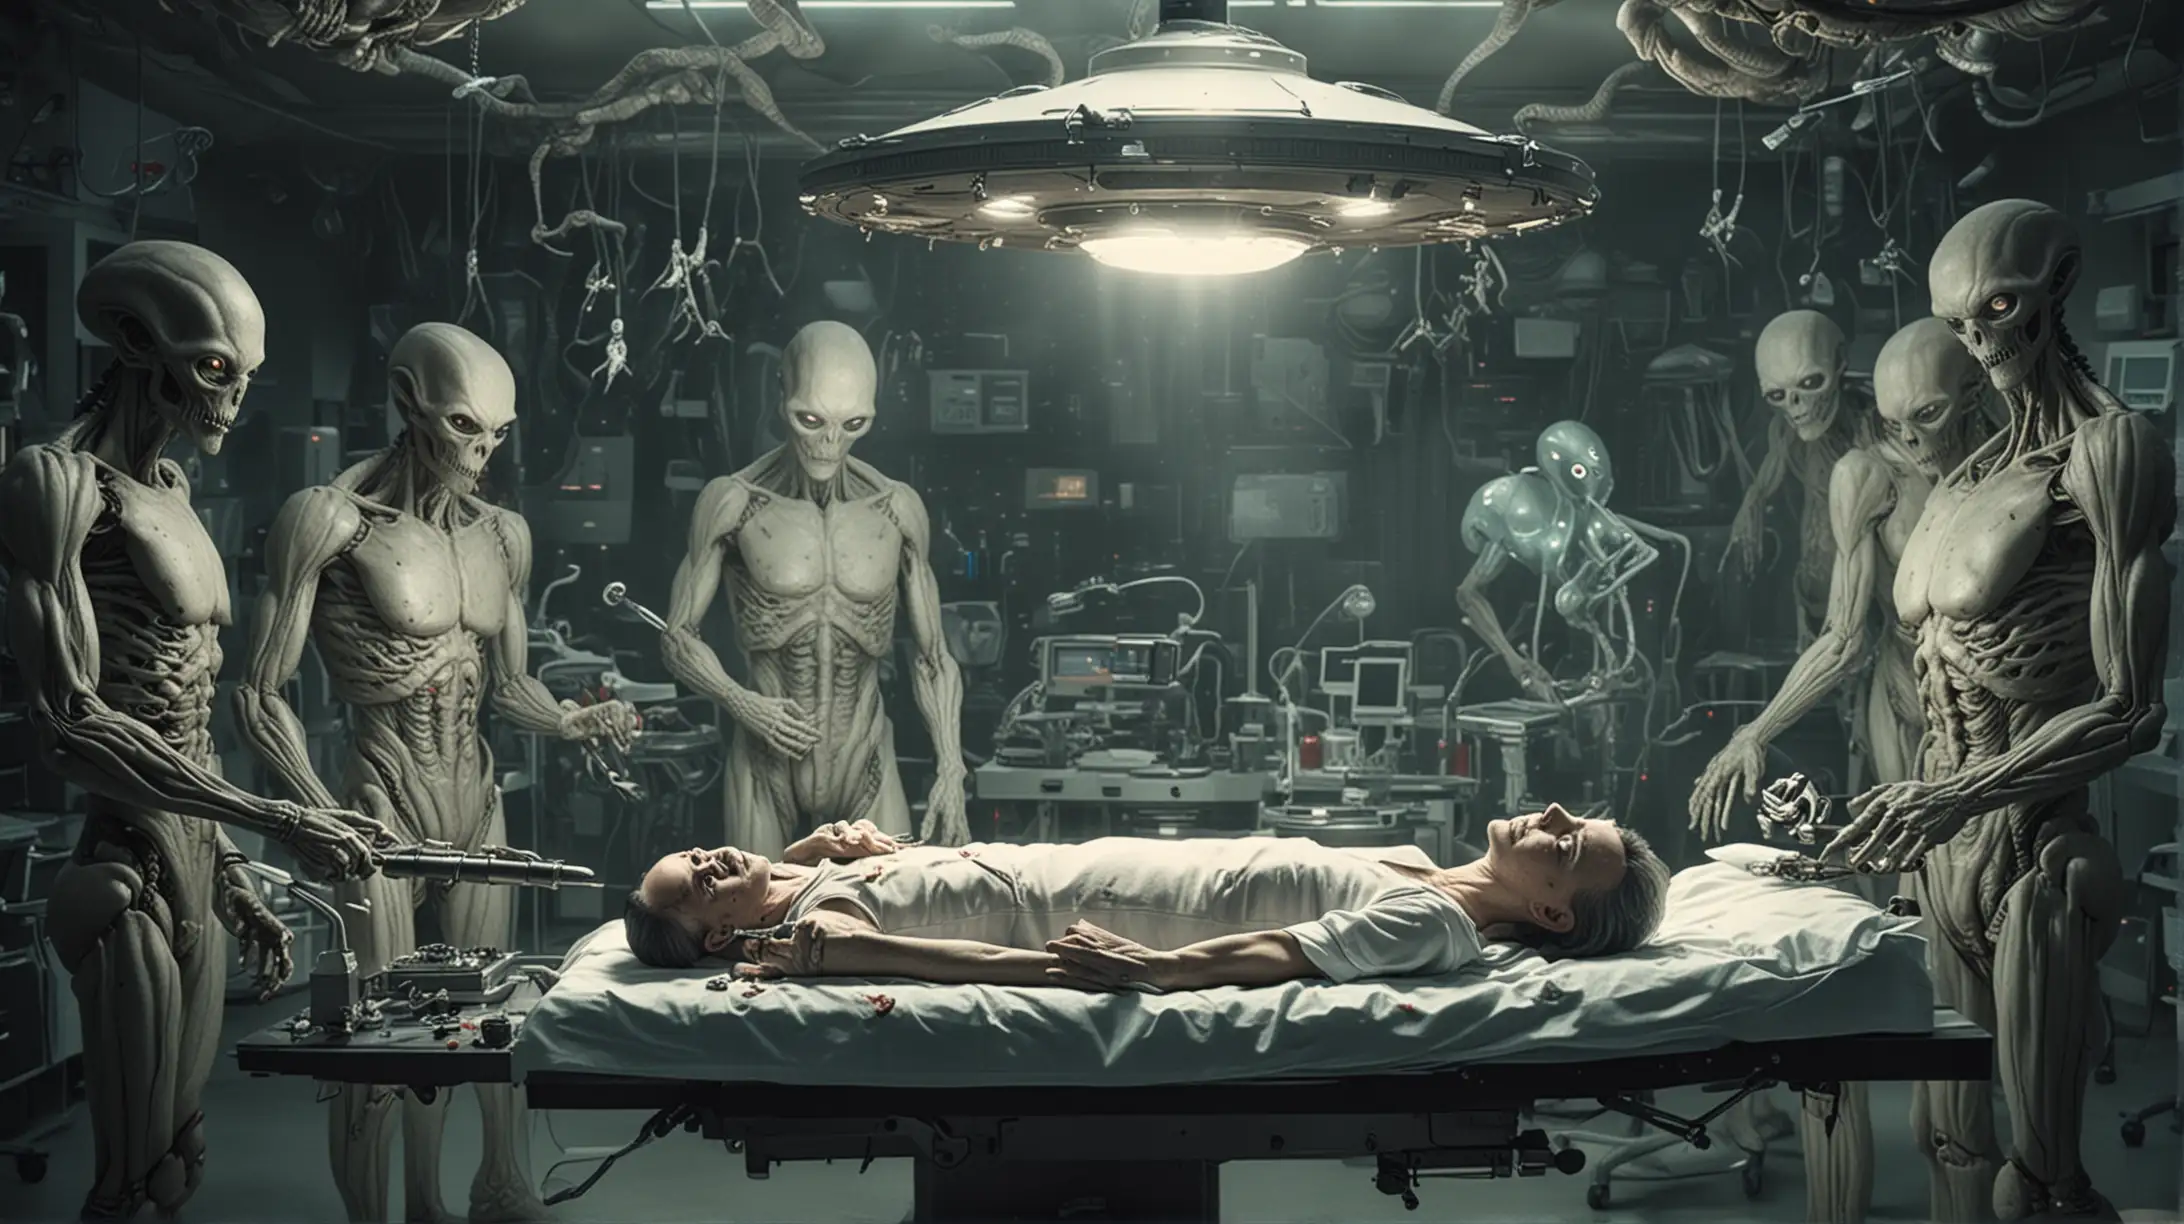 UFO Abductee on Operating Table with Aliens and Scary Tools